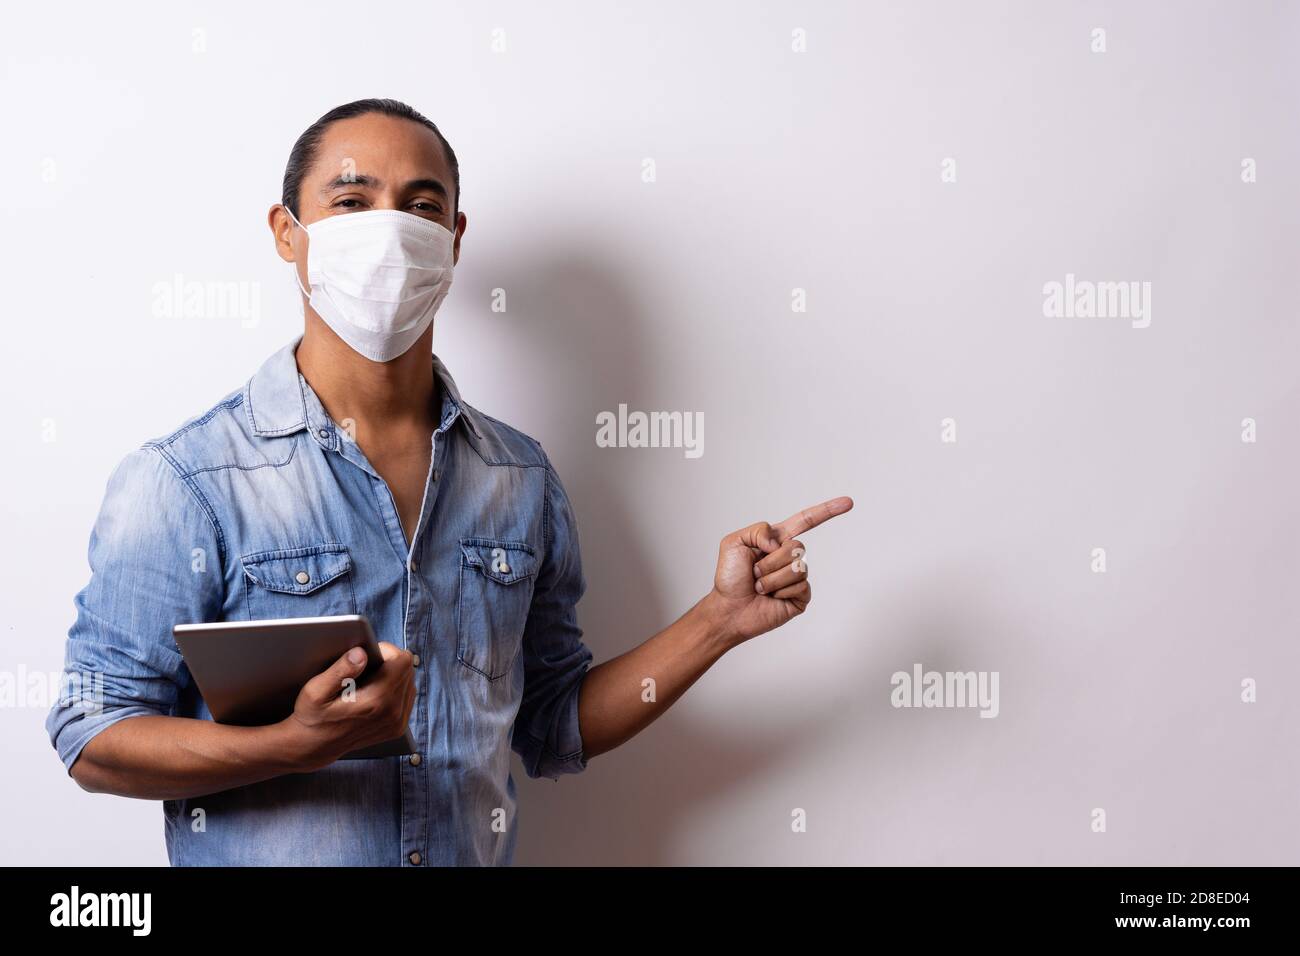 Latino man with facial mask holds a tablet and points to the empty space on white background. Social distance. Stock Photo